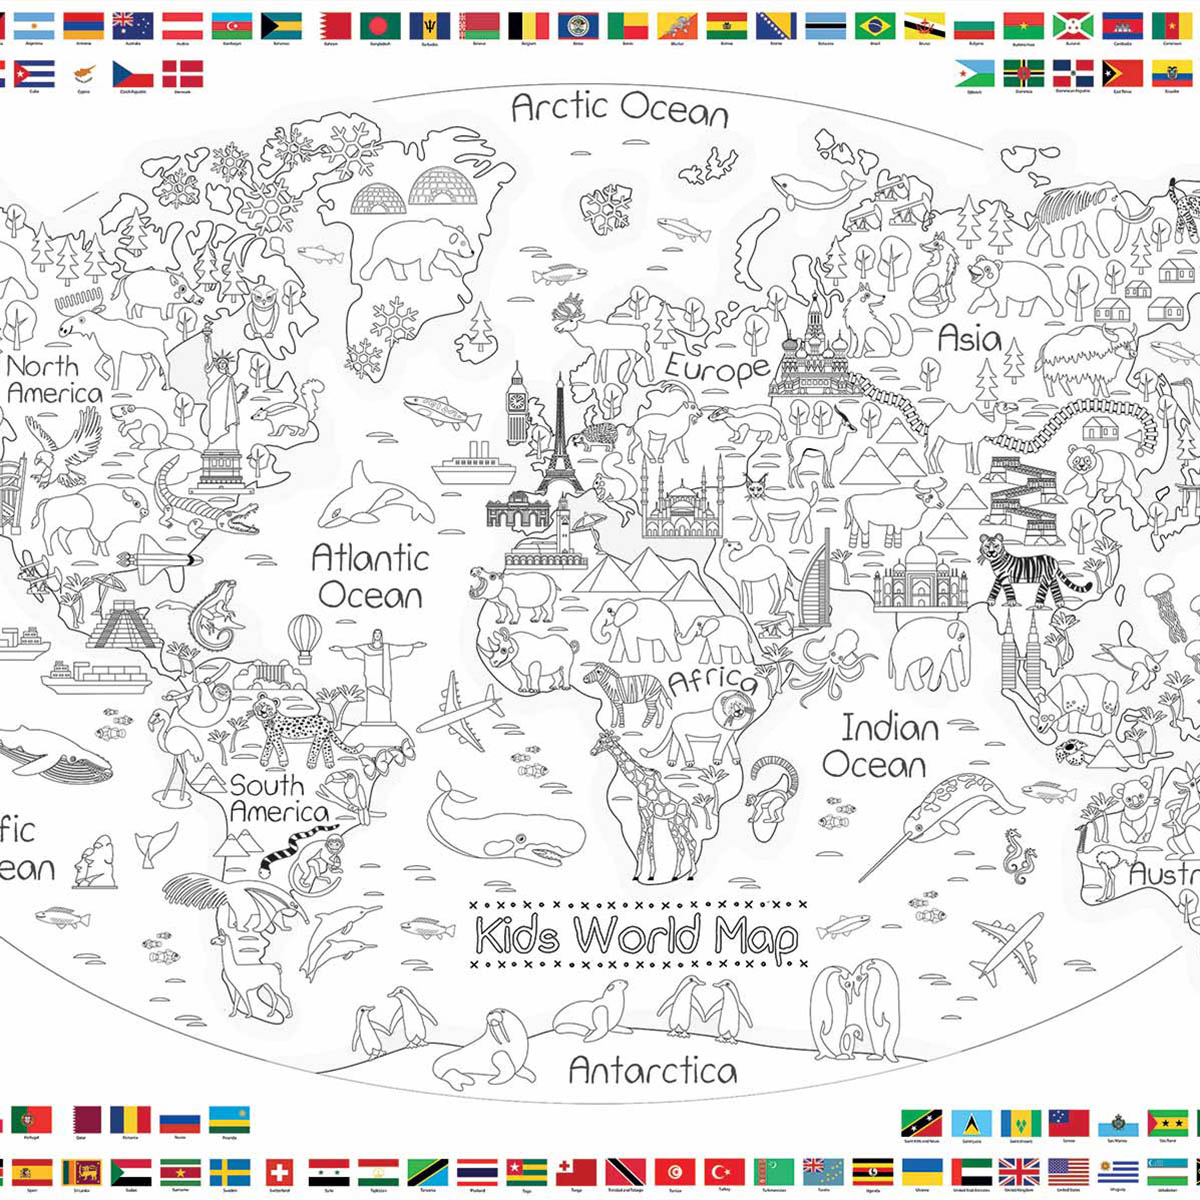 Kids World Map - (35x52) Giant Coloring Poster for Children